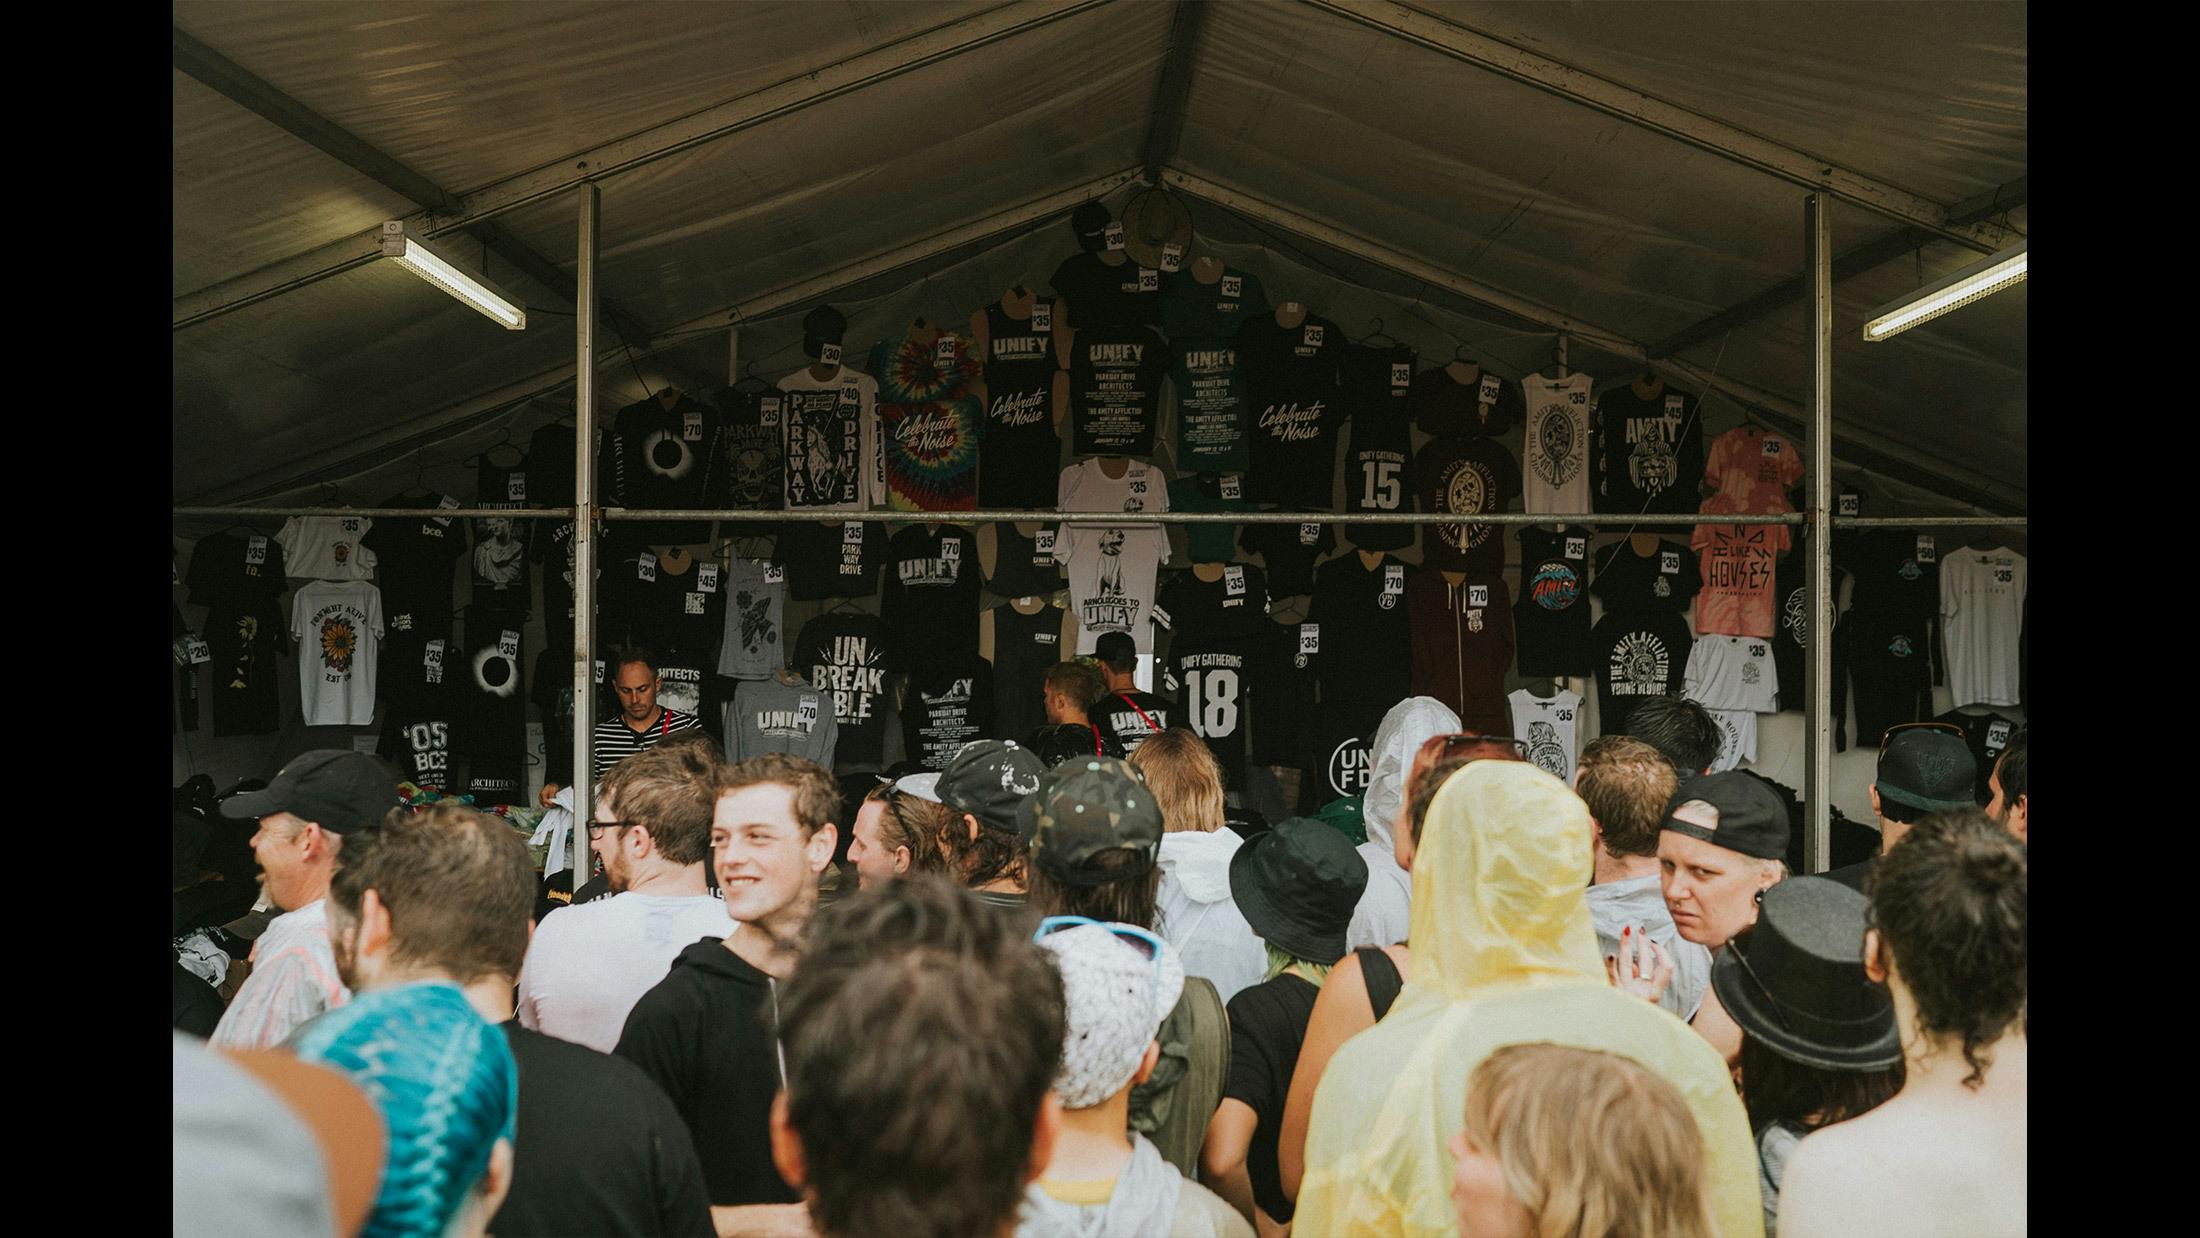 Unlike at some of our bigger UK festivals, UNIFY's modest size means that only one main merch stall is required. It's extra cool, too, because it's where bands on the bill do their signings, so there's a double-whammy of awesome threads and ace artists nearby.